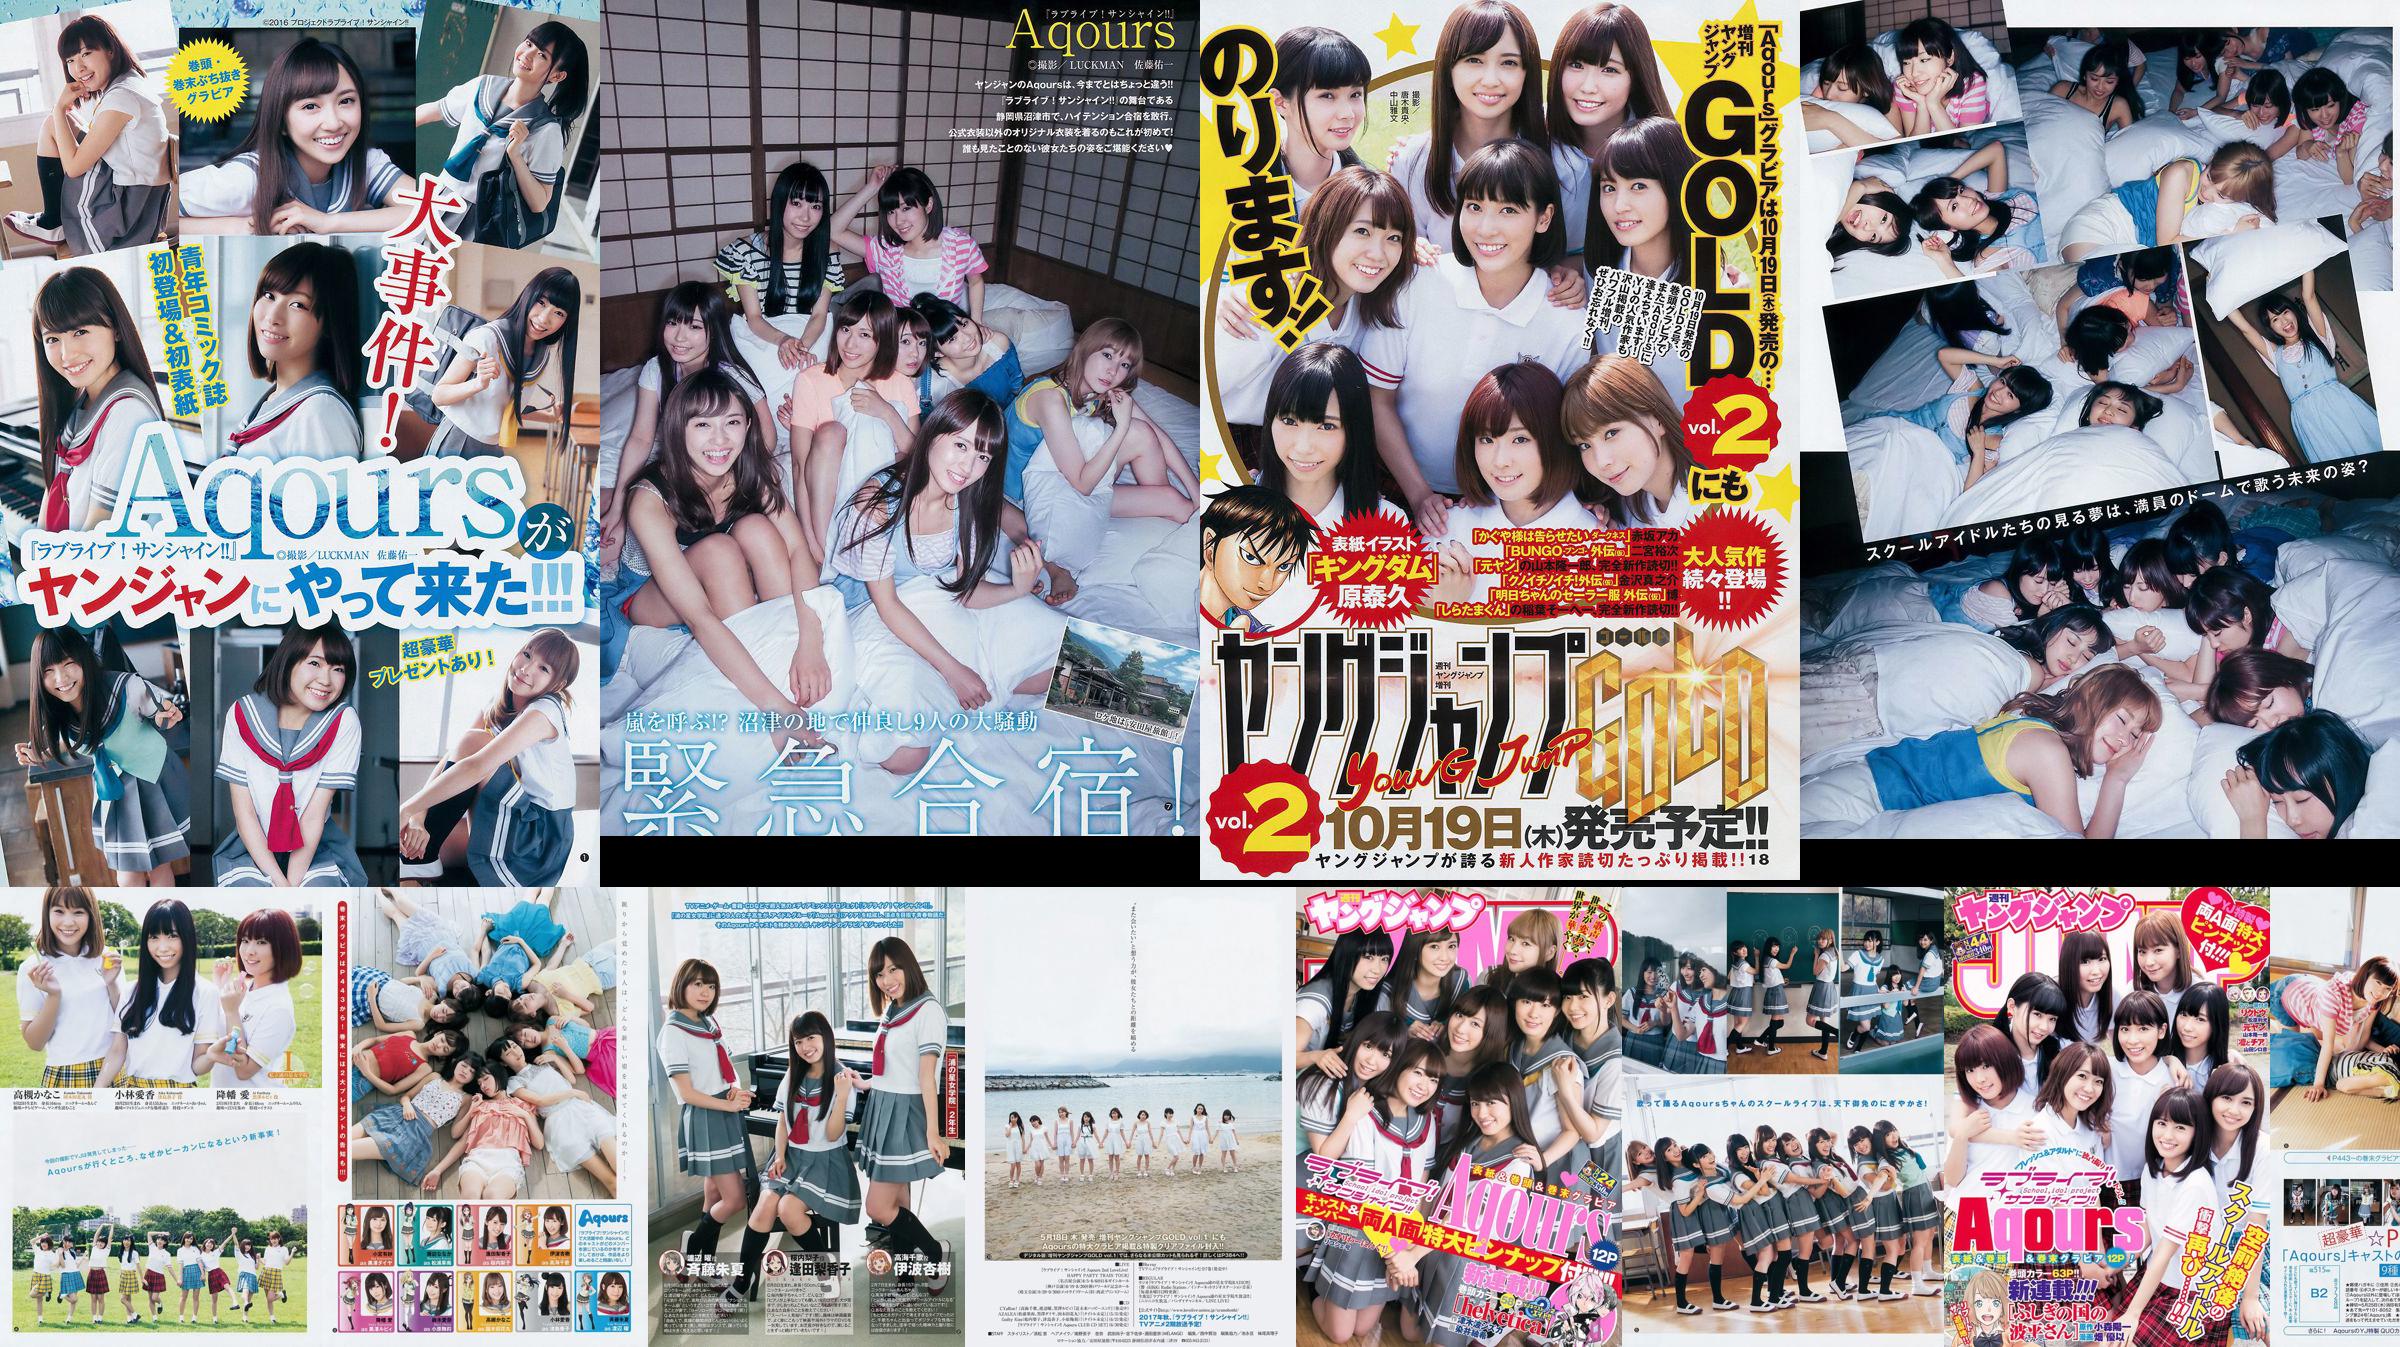 Japan Combination Aqours [Weekly Young Jump] Фото-журнал № 44, 2017 No.dfbfd6 Страница 67